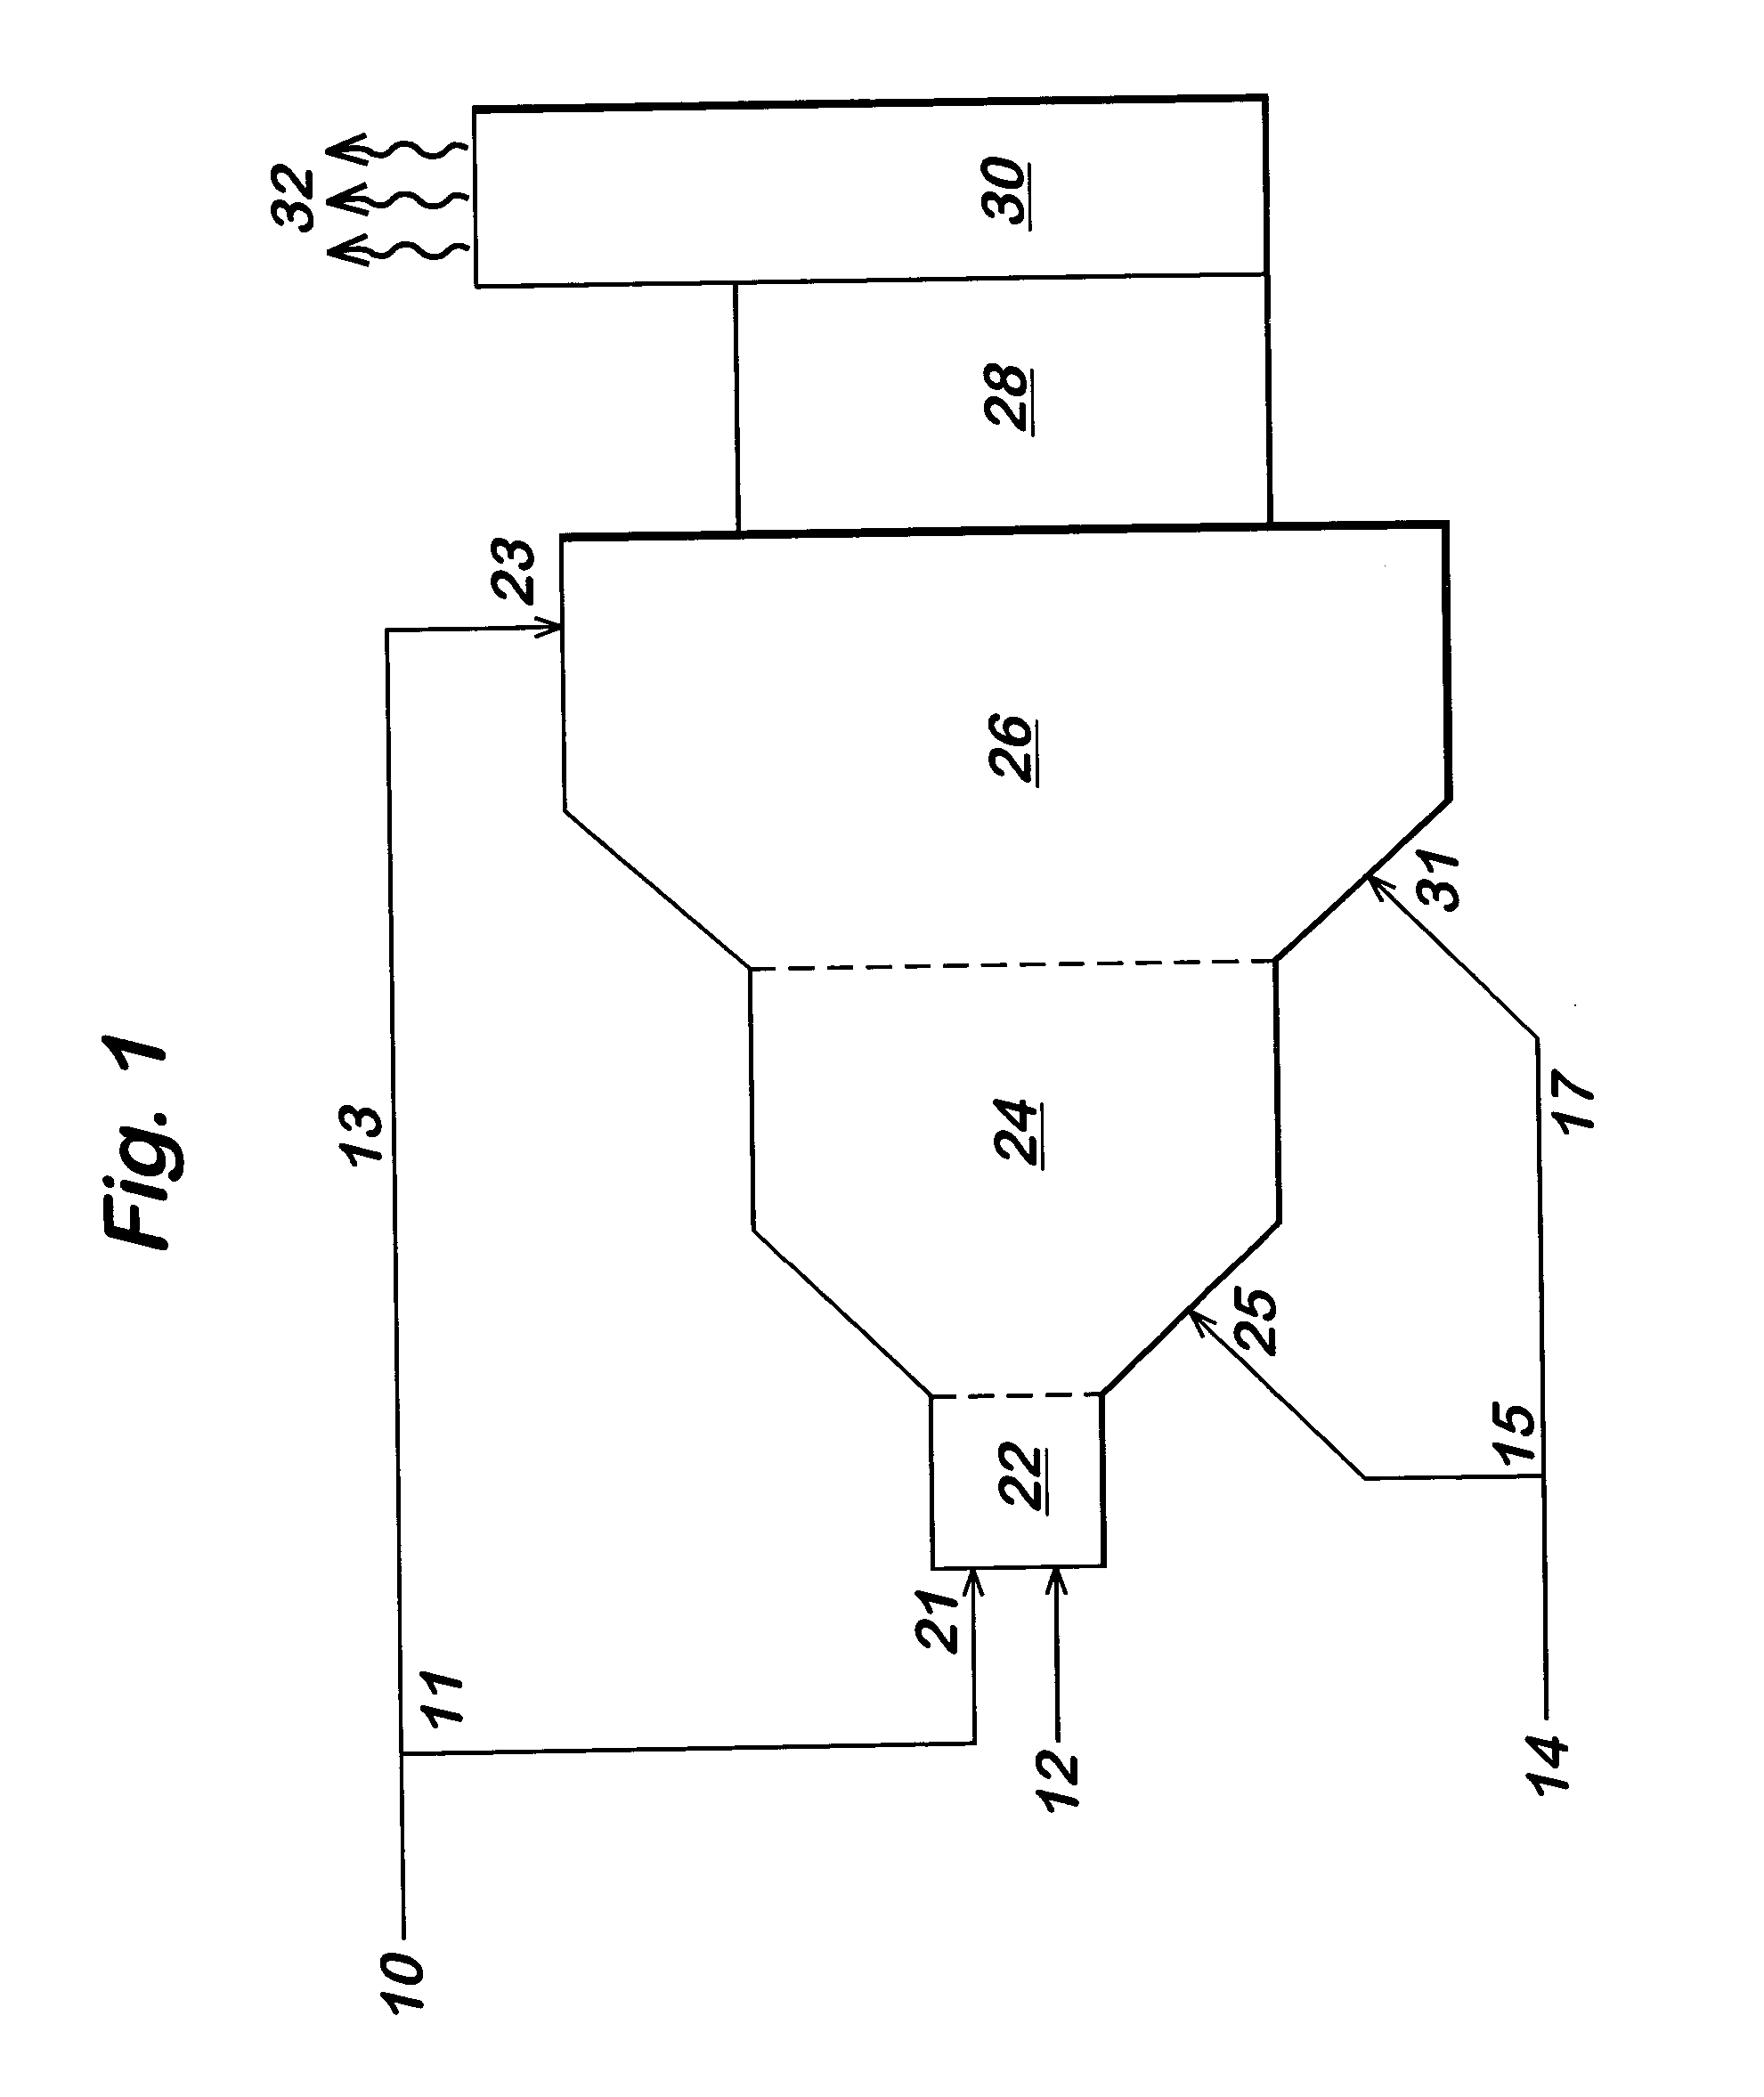 Method for reducing waste oxide gas emissions in industrial processes